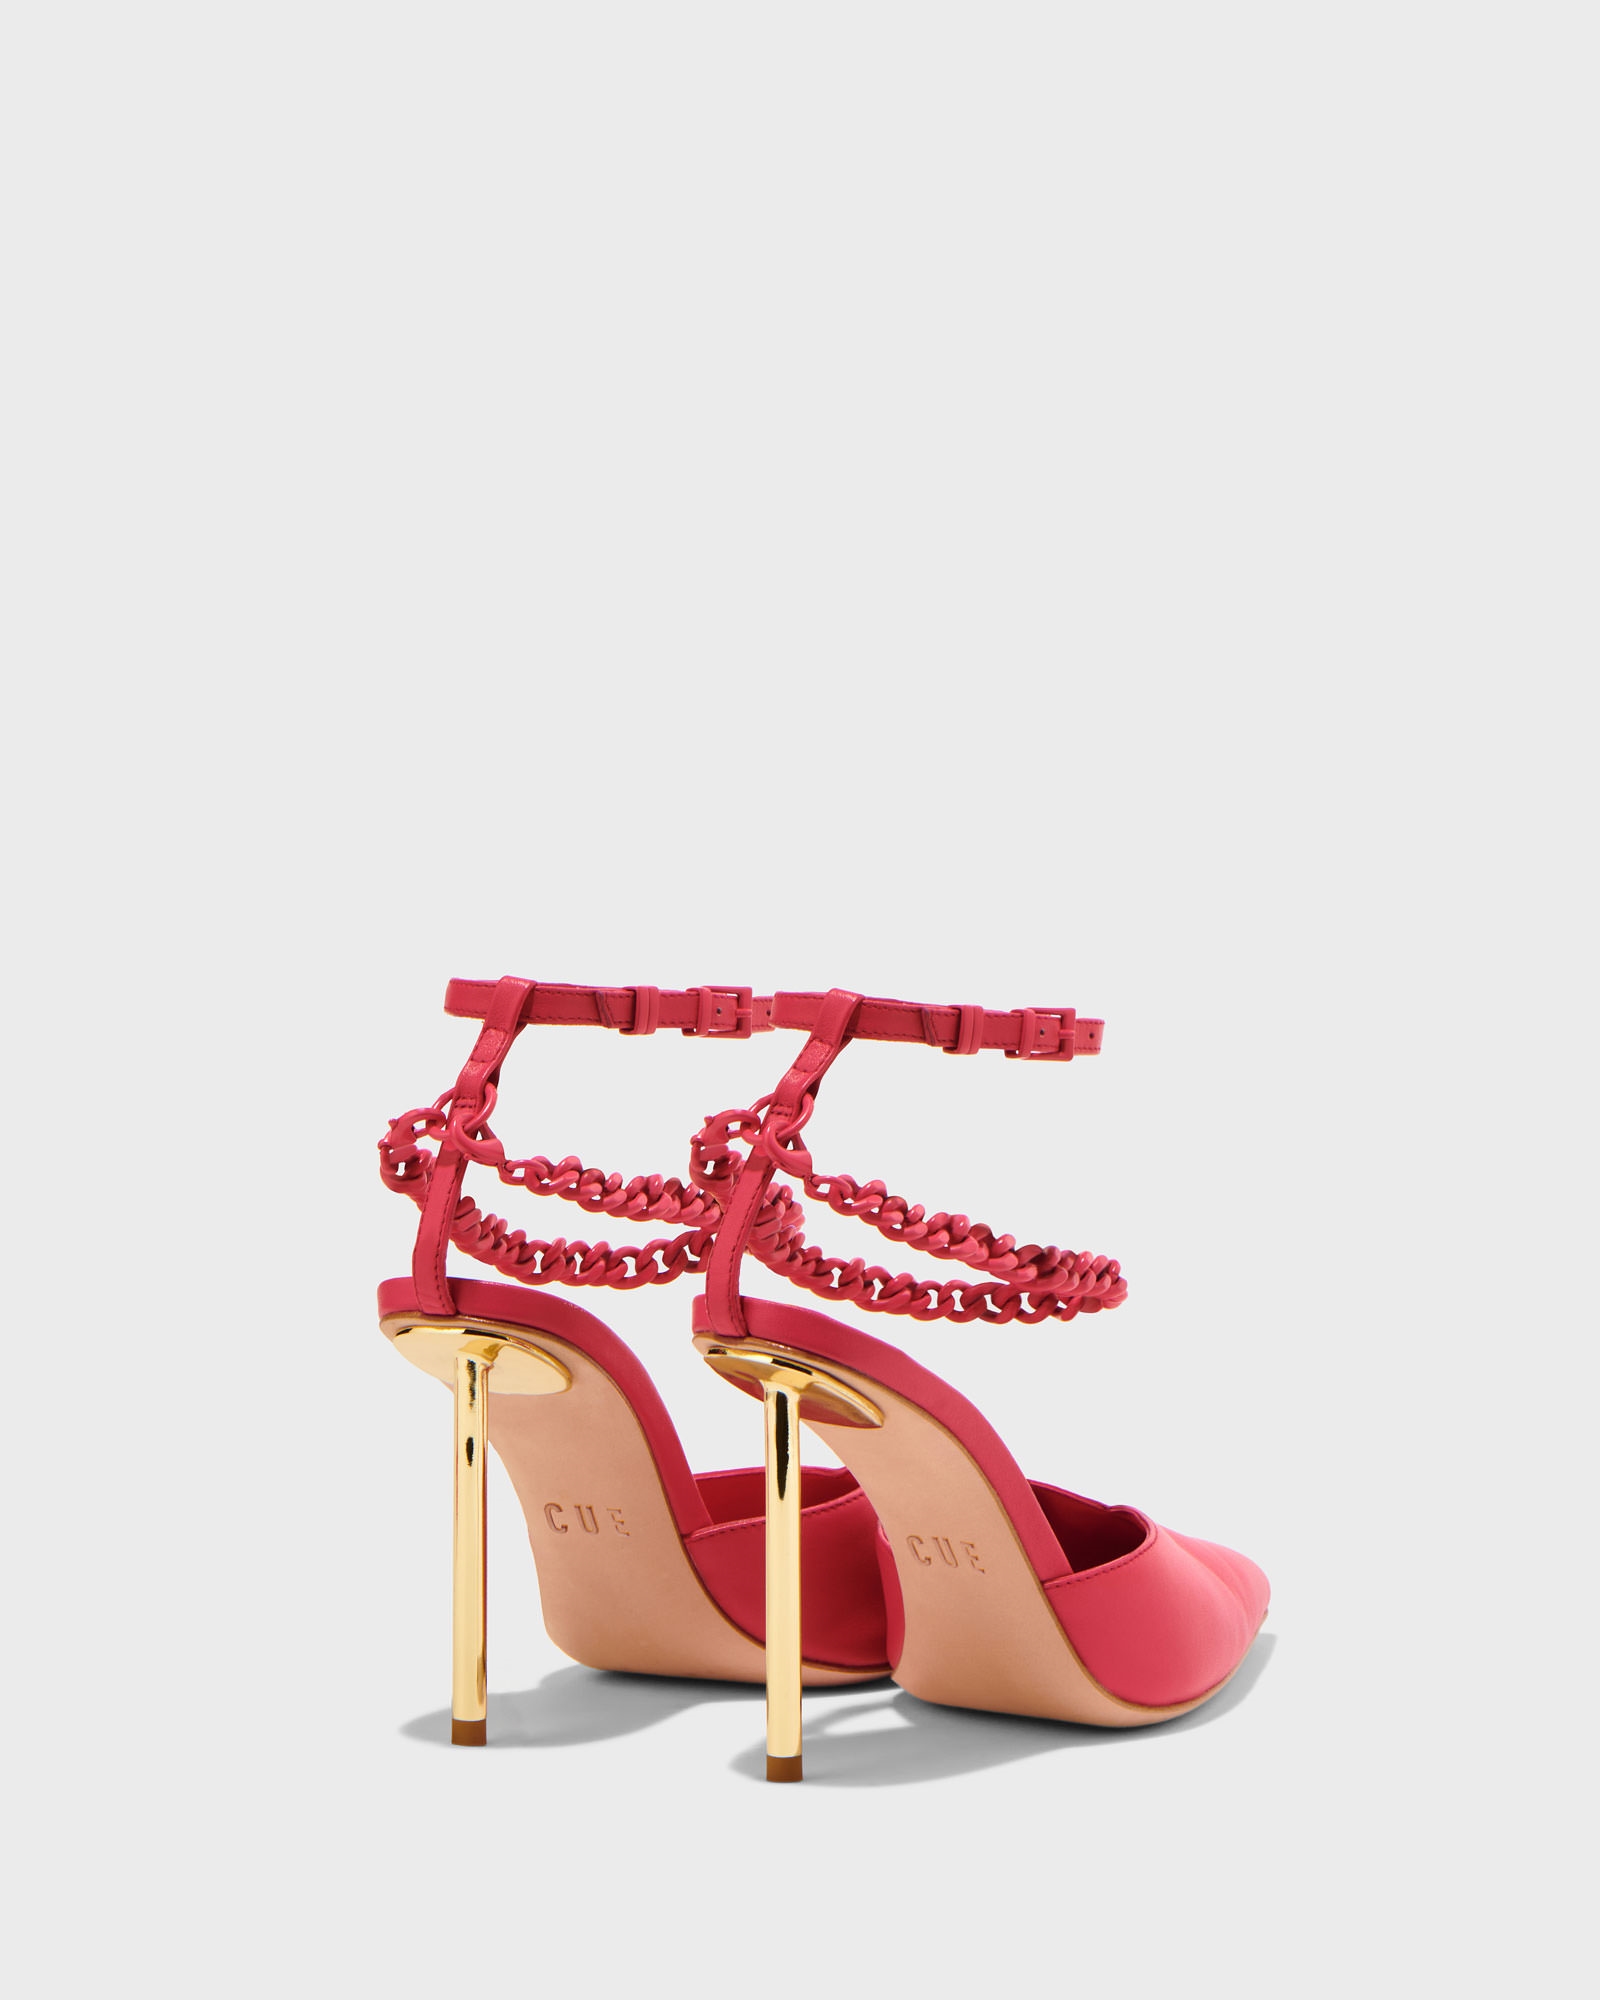 Accessories  | Chain and Metal Heel | 540 Pink